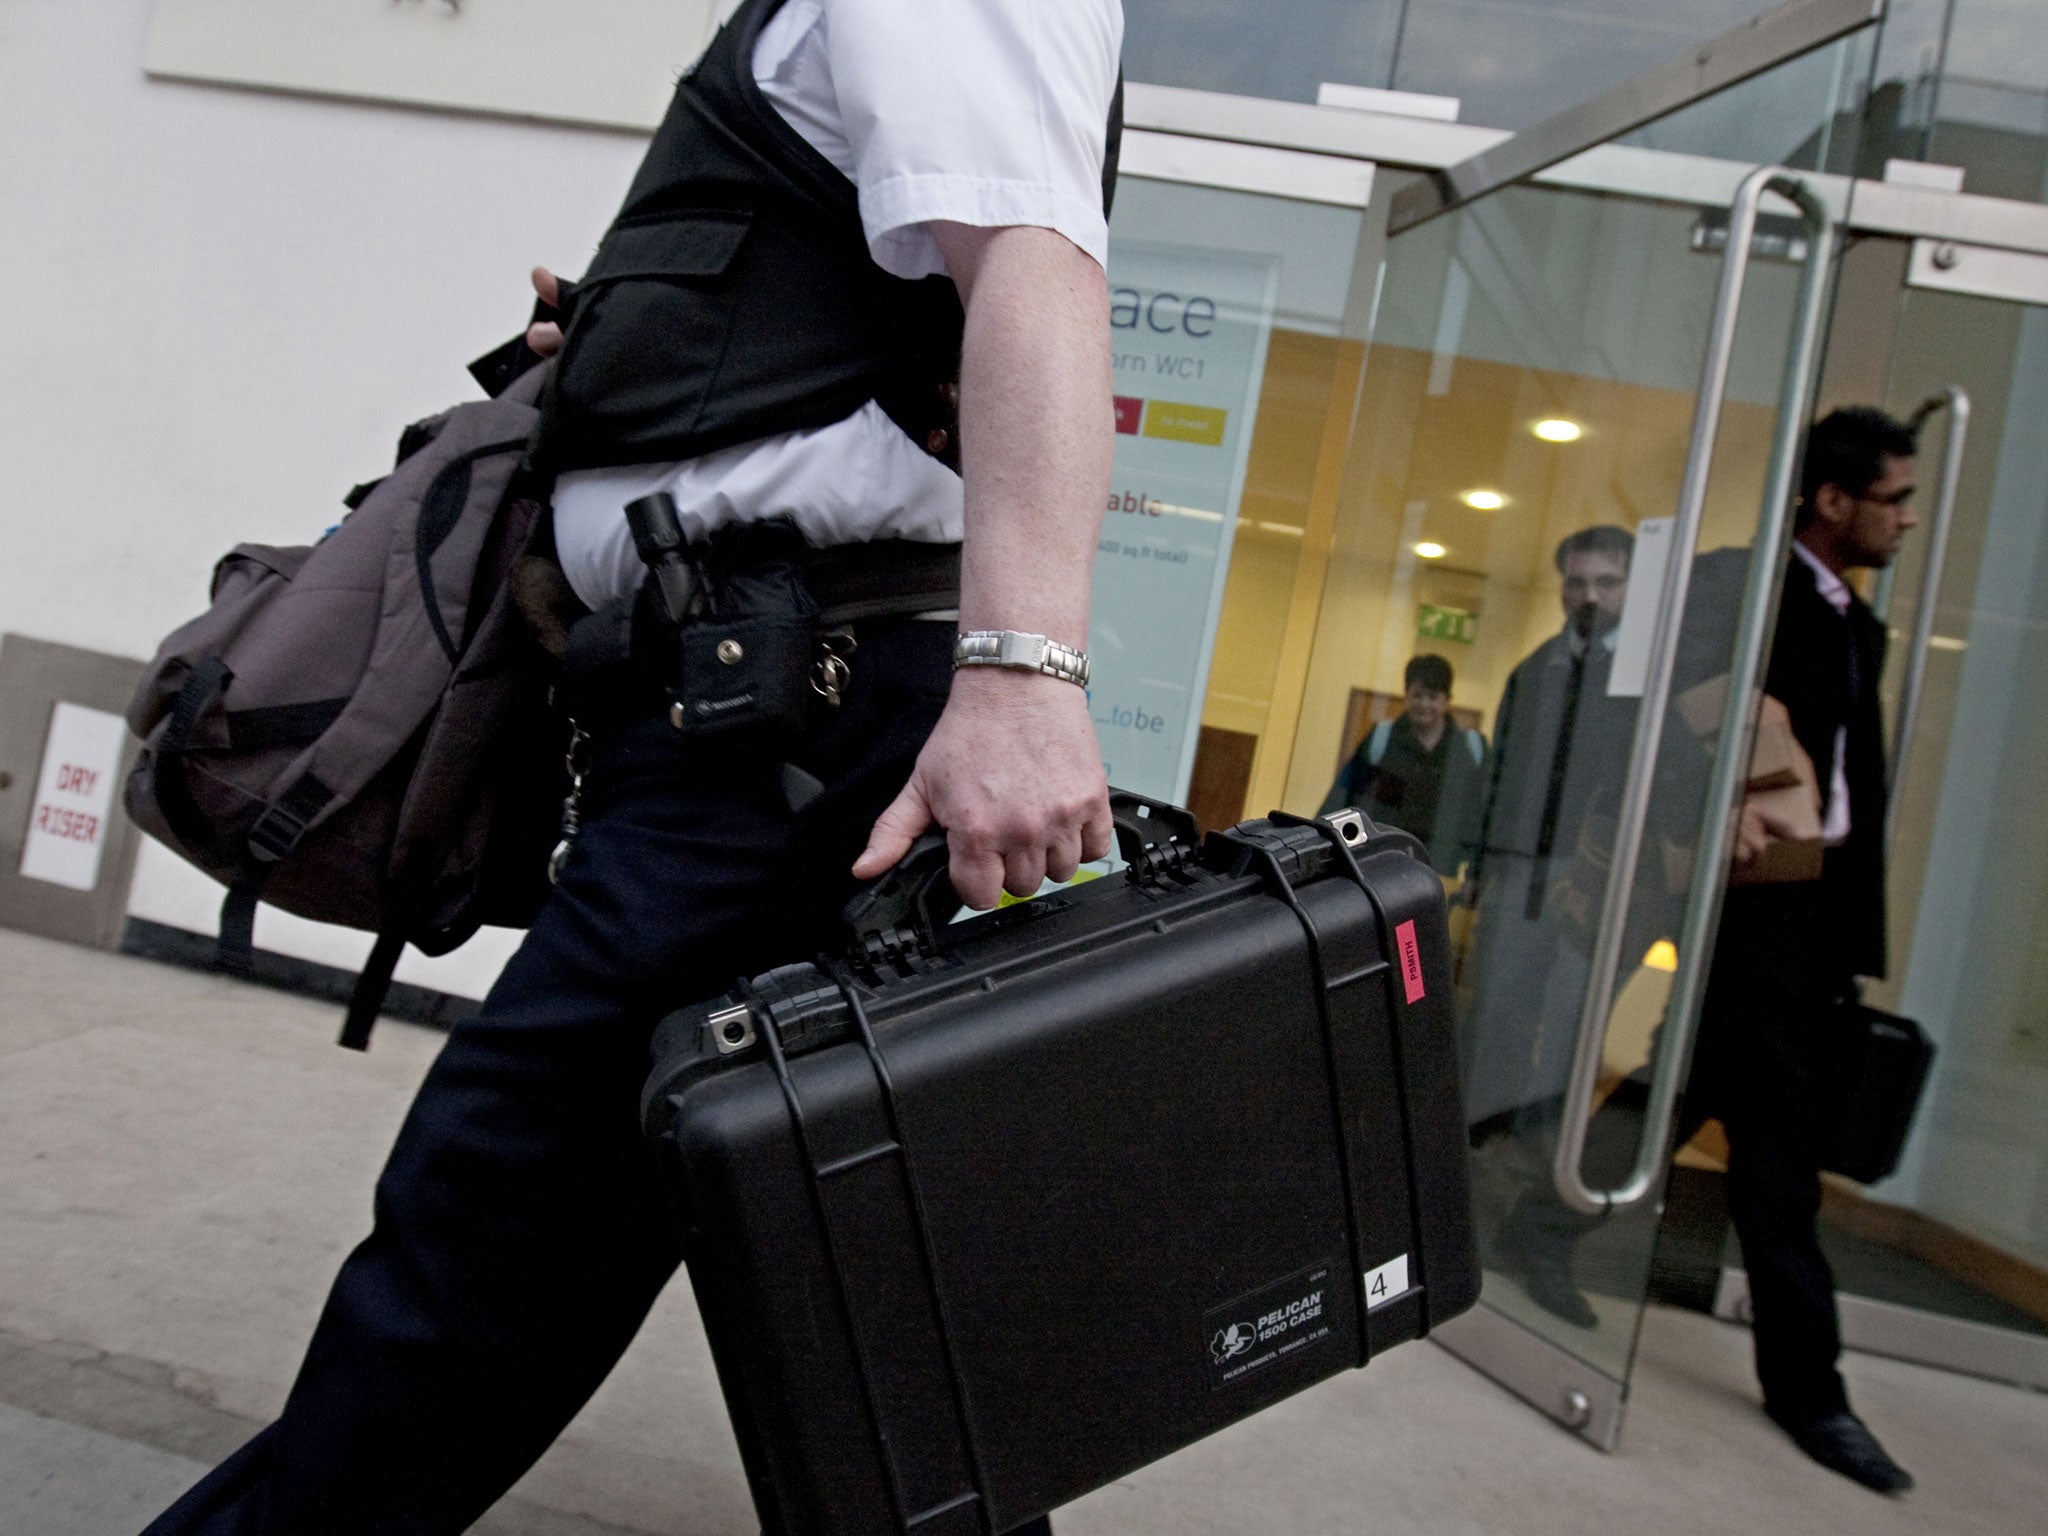 A police officer leaves the London office of French engineering group Alstom, on March 24, 2010. Three members of the board were arrested after investigation by the SFO